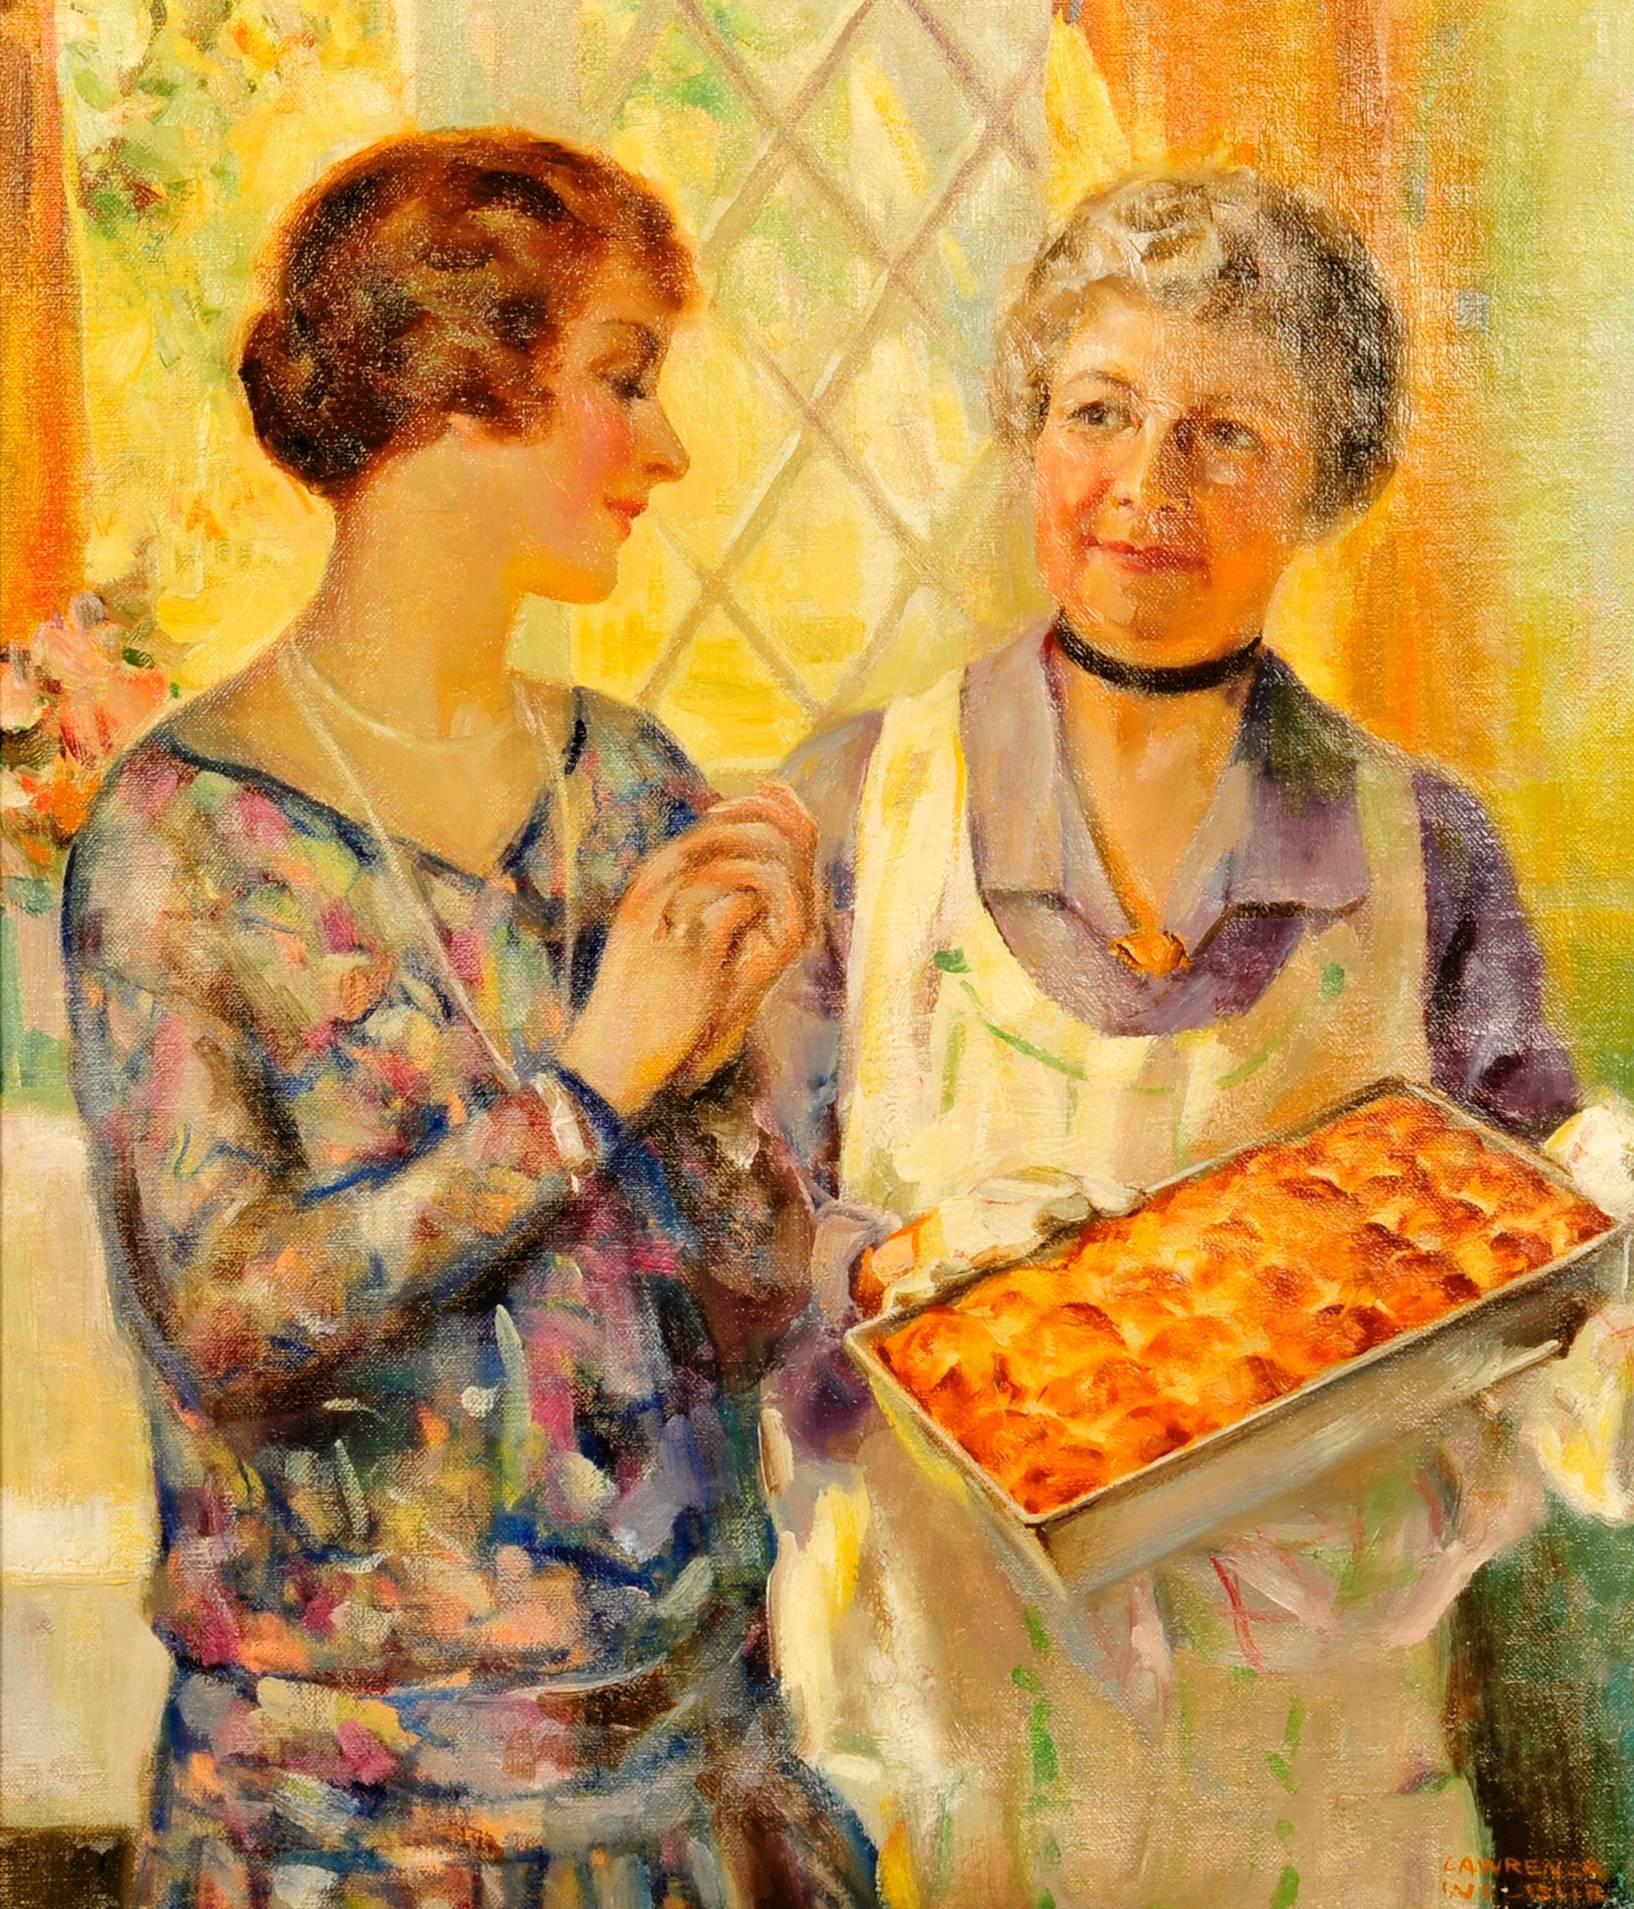 Baking Advertisement - Painting by Lawrence Wilbur